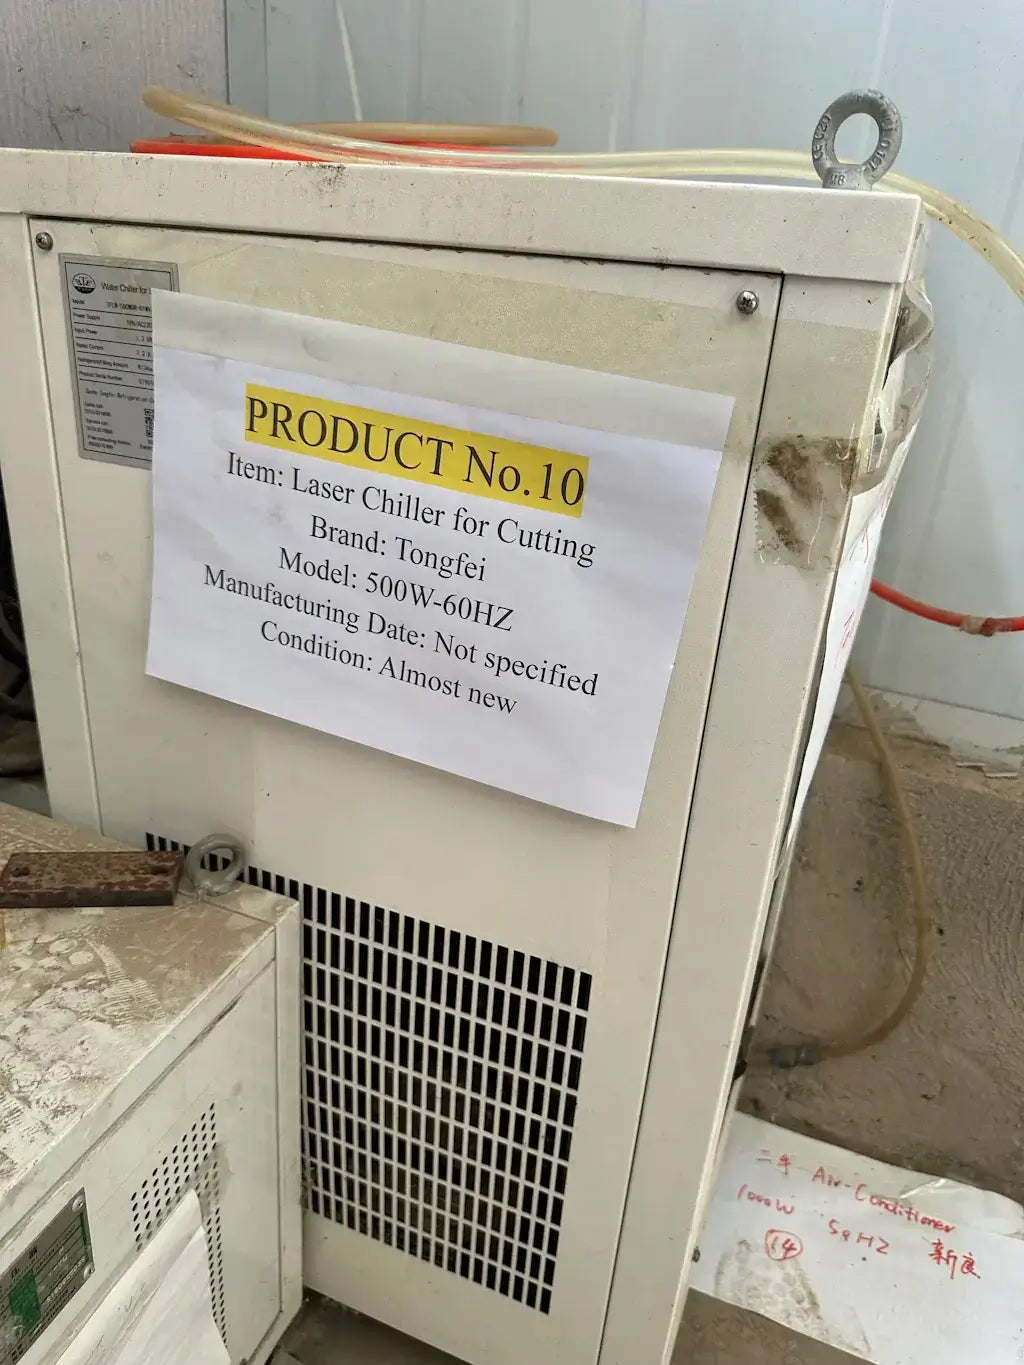 Tongfei Laser Chiller 500W-60HZ for Cutting, Almost New Condition, Product No.10